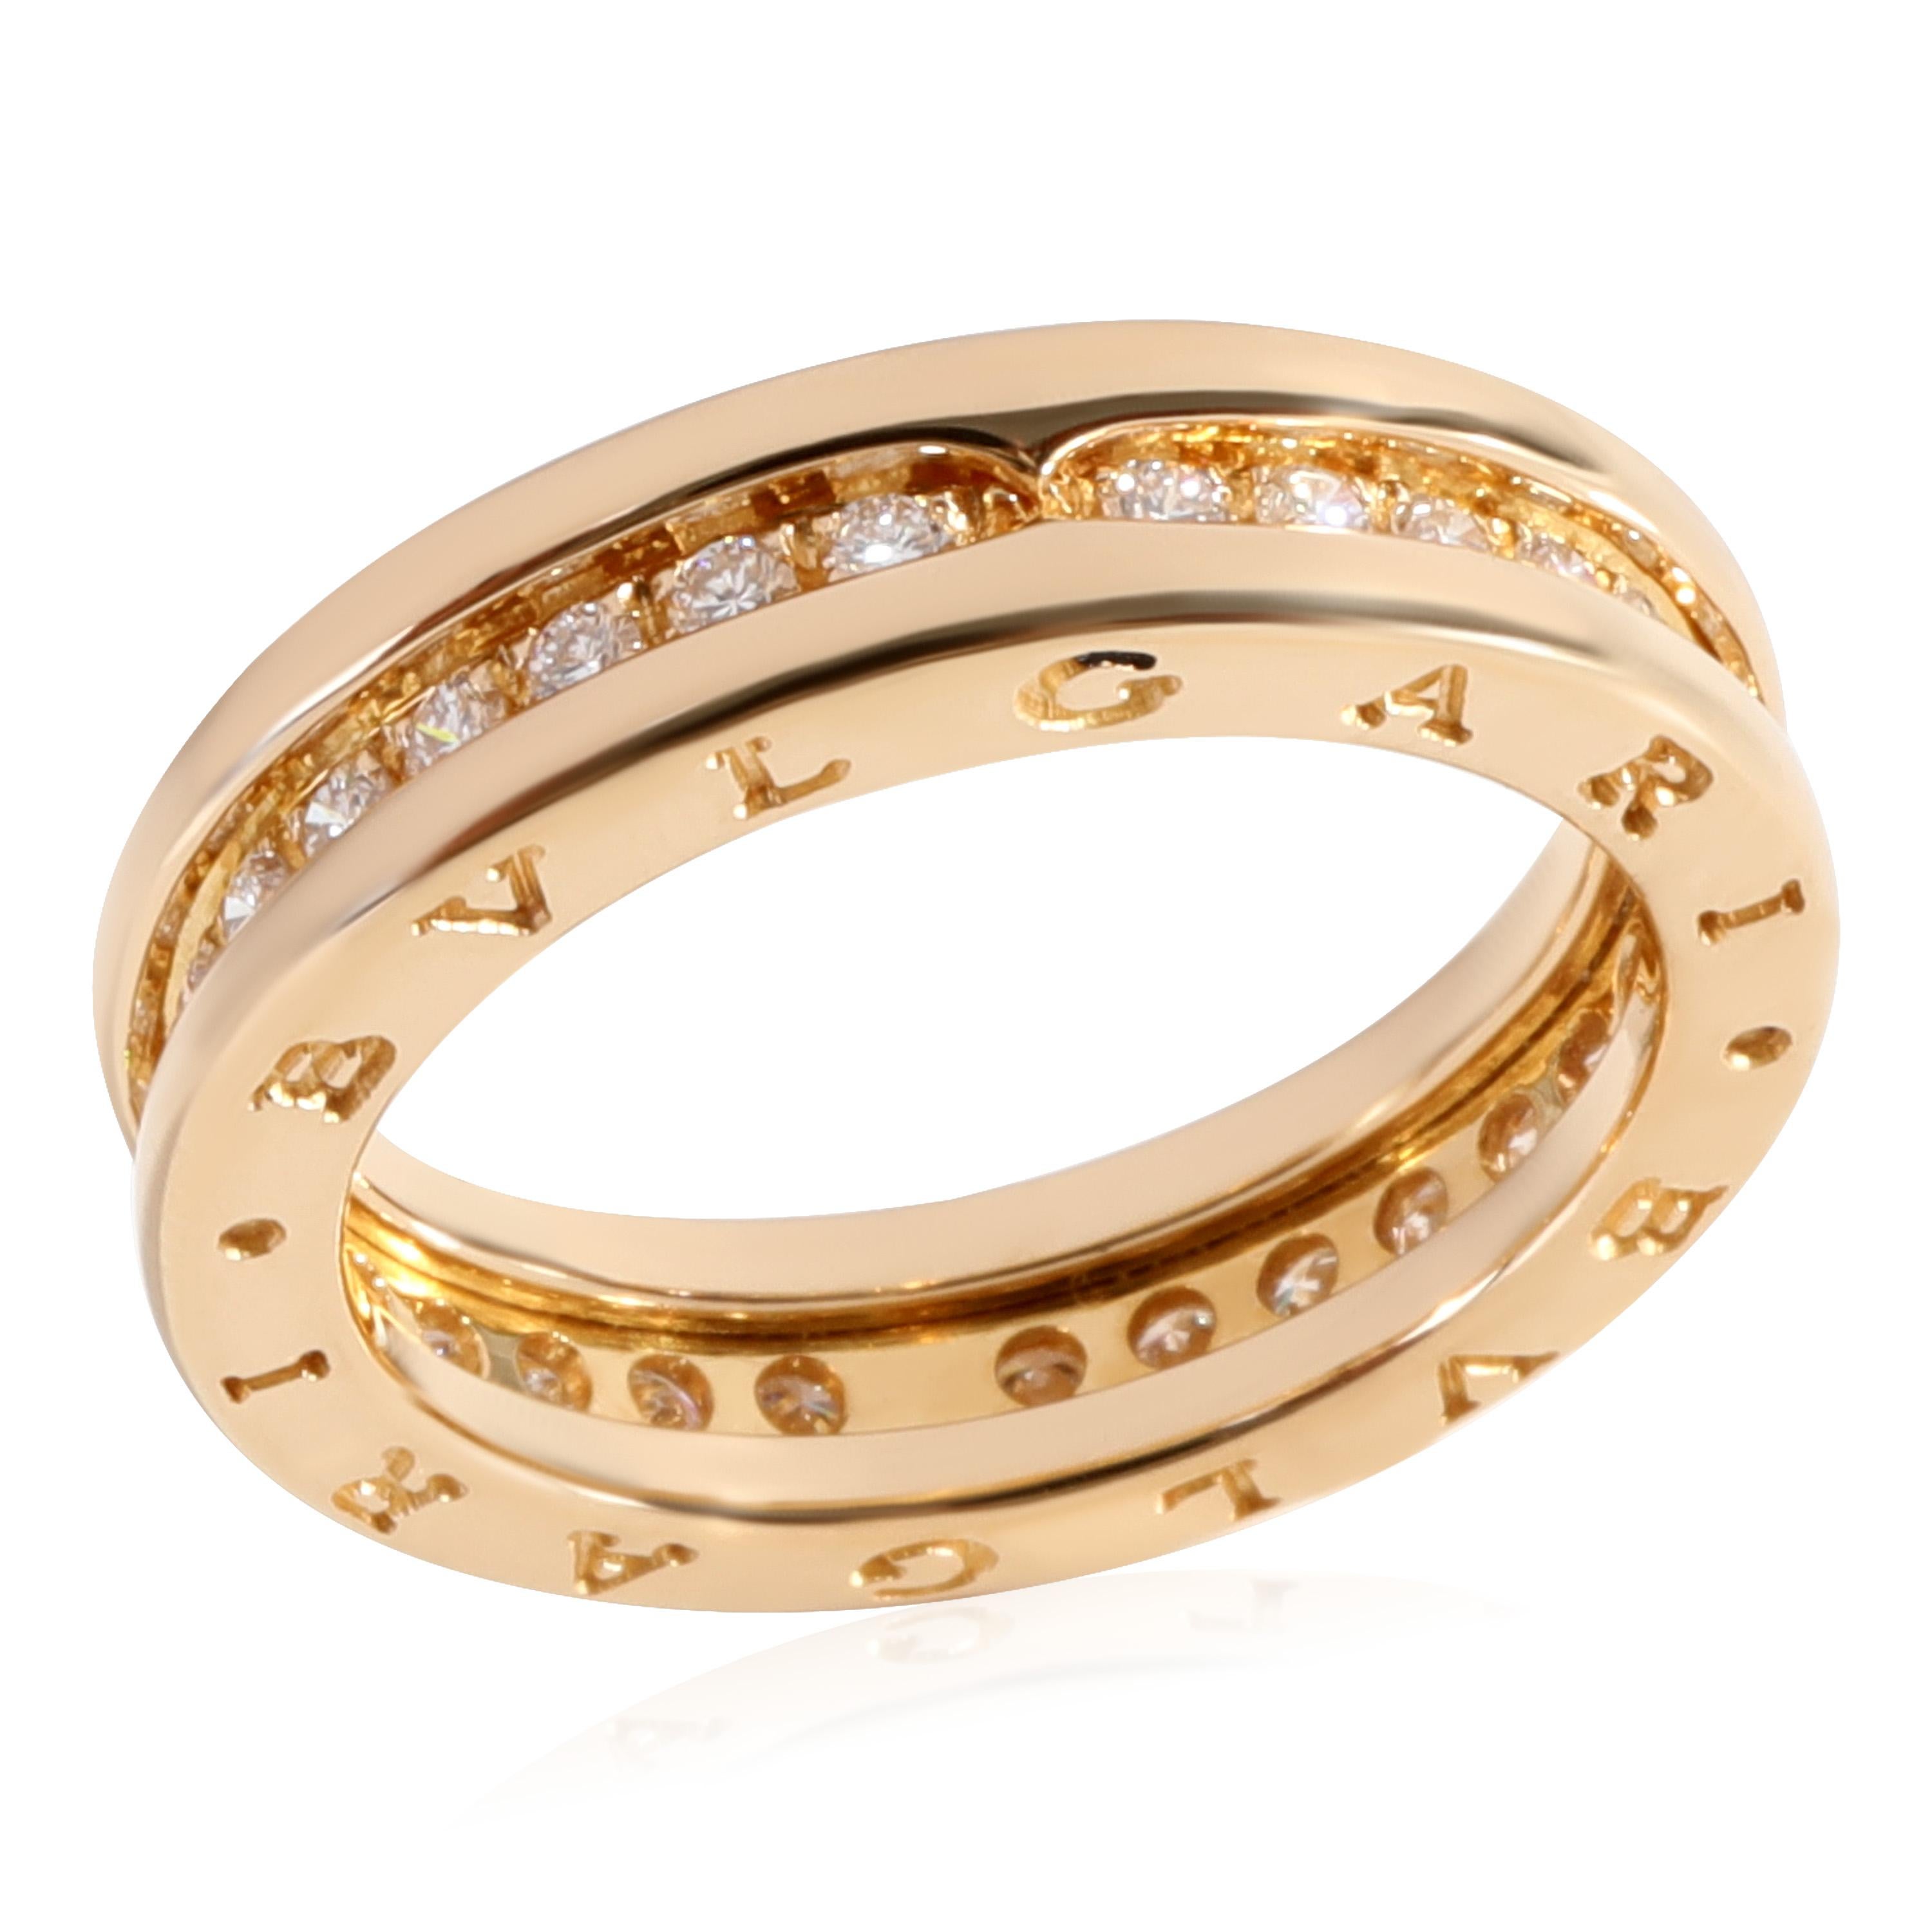 Bulgari B.Zero1 Diamond Ring in 18k Yellow Gold 0.45 CTW

PRIMARY DETAILS
SKU: 118616
Listing Title: Bulgari B.Zero1 Diamond Ring in 18k Yellow Gold 0.45 CTW
Condition Description: Retails for 6050 USD. In excellent condition and recently polished.